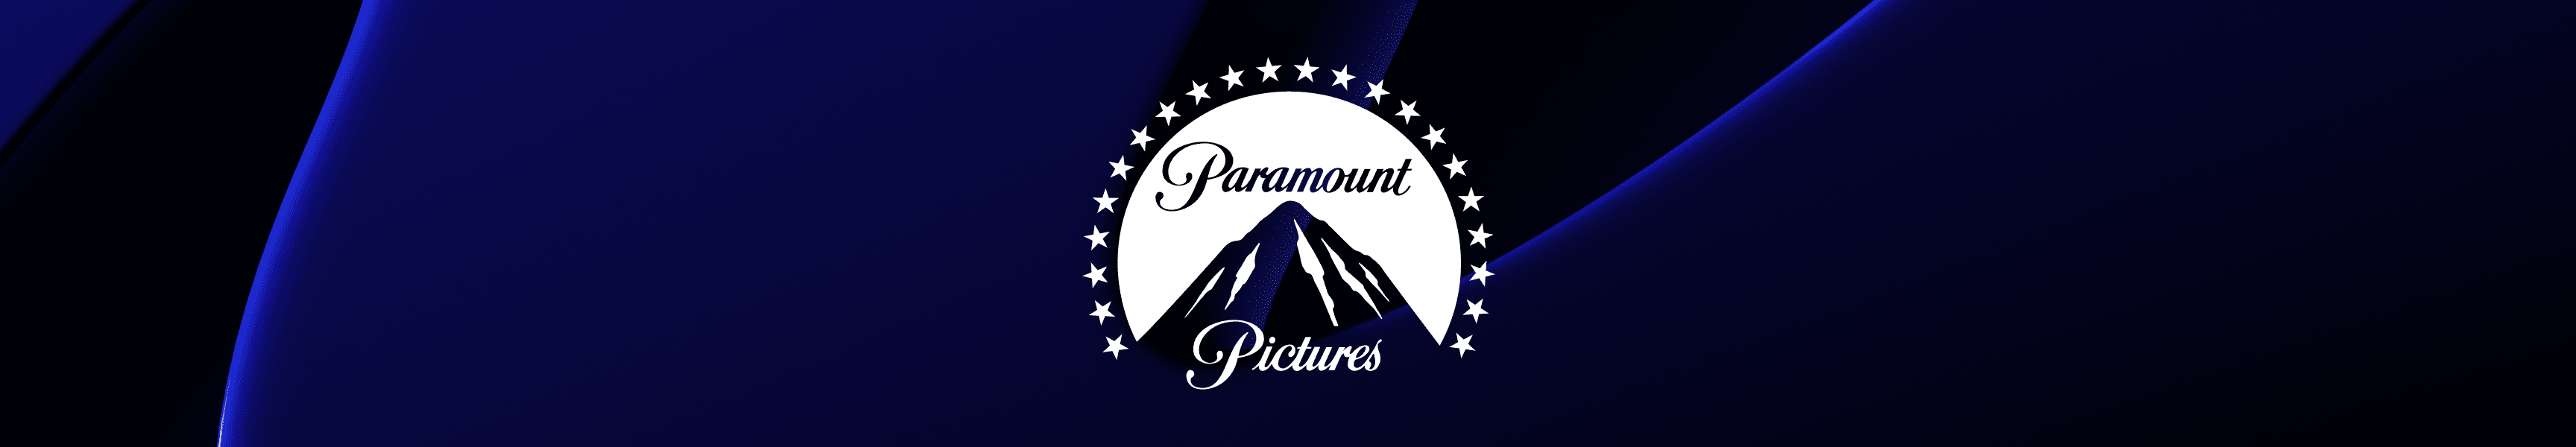 Paramount Pictures Stickers